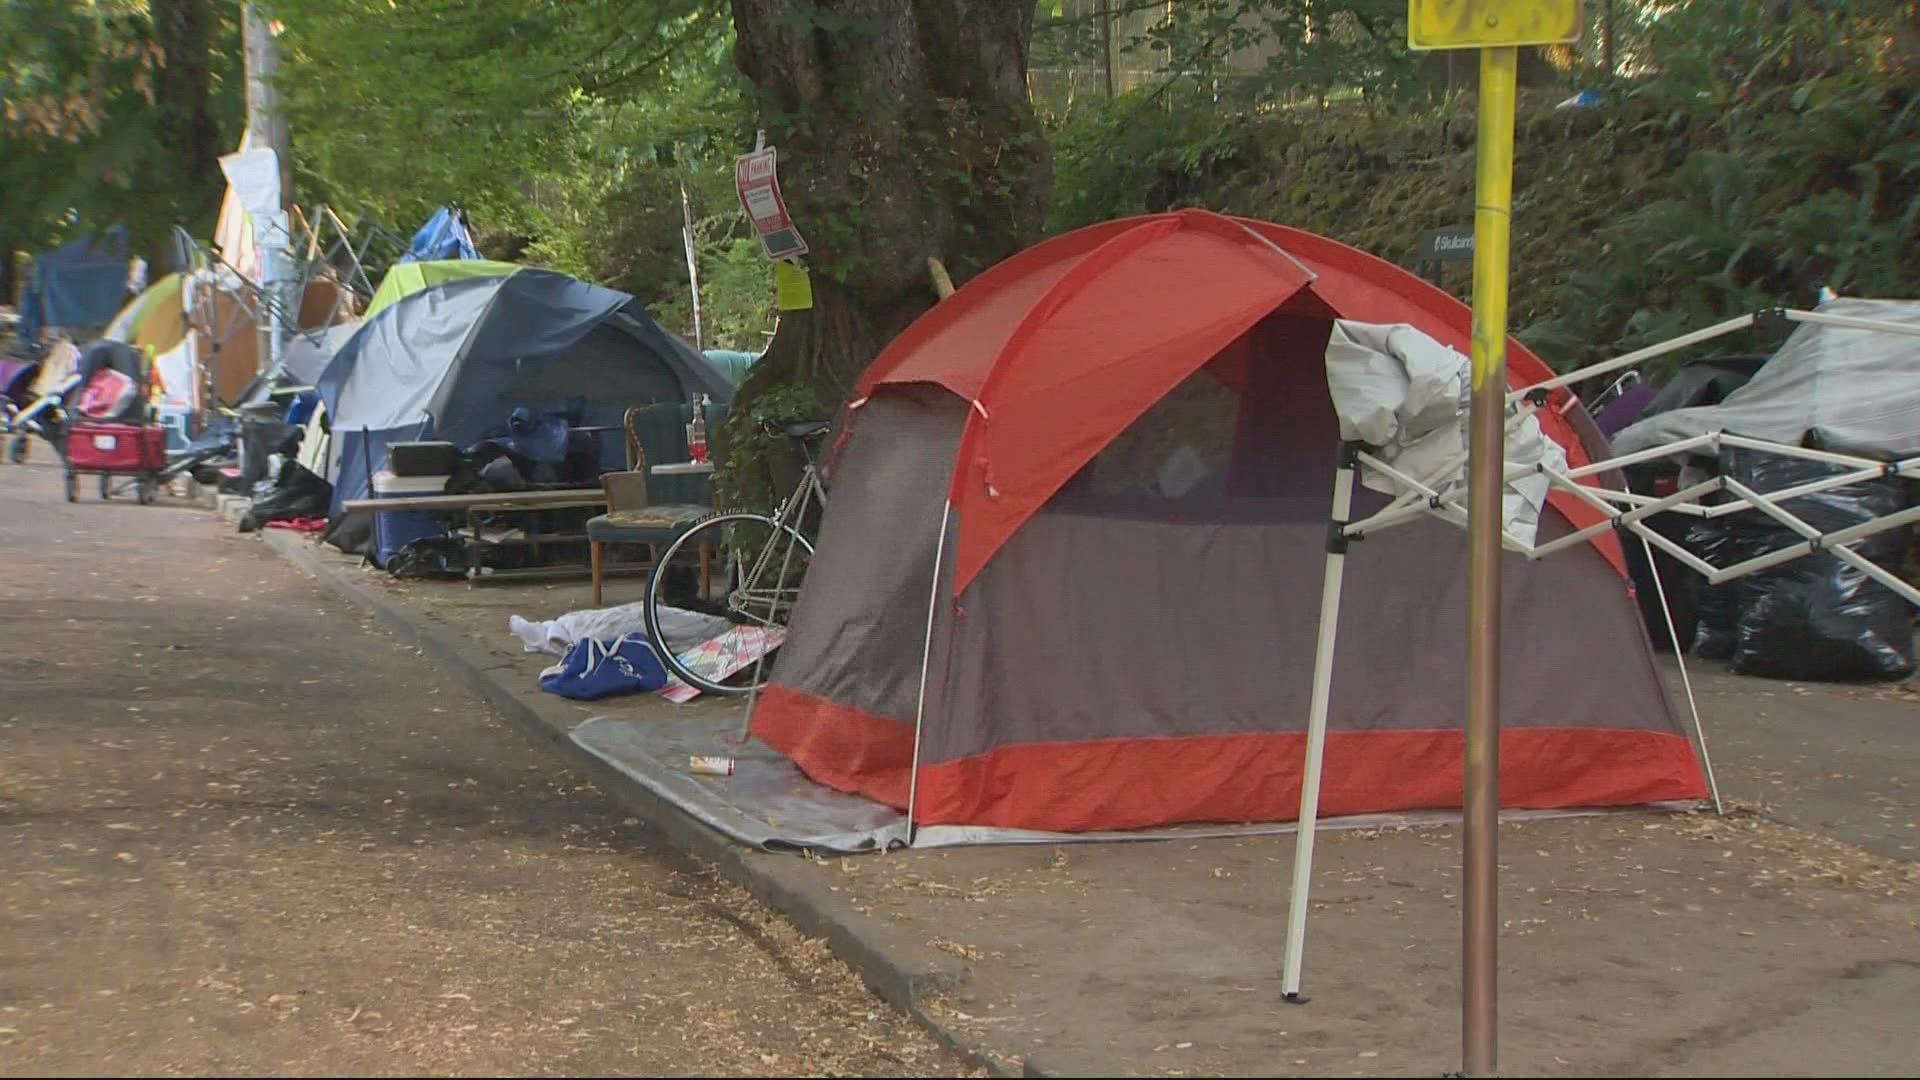 Police and biohazard crews showed up first thing Thursday morning to clear the camp that has been building up for months. Maggie Vespa reports.